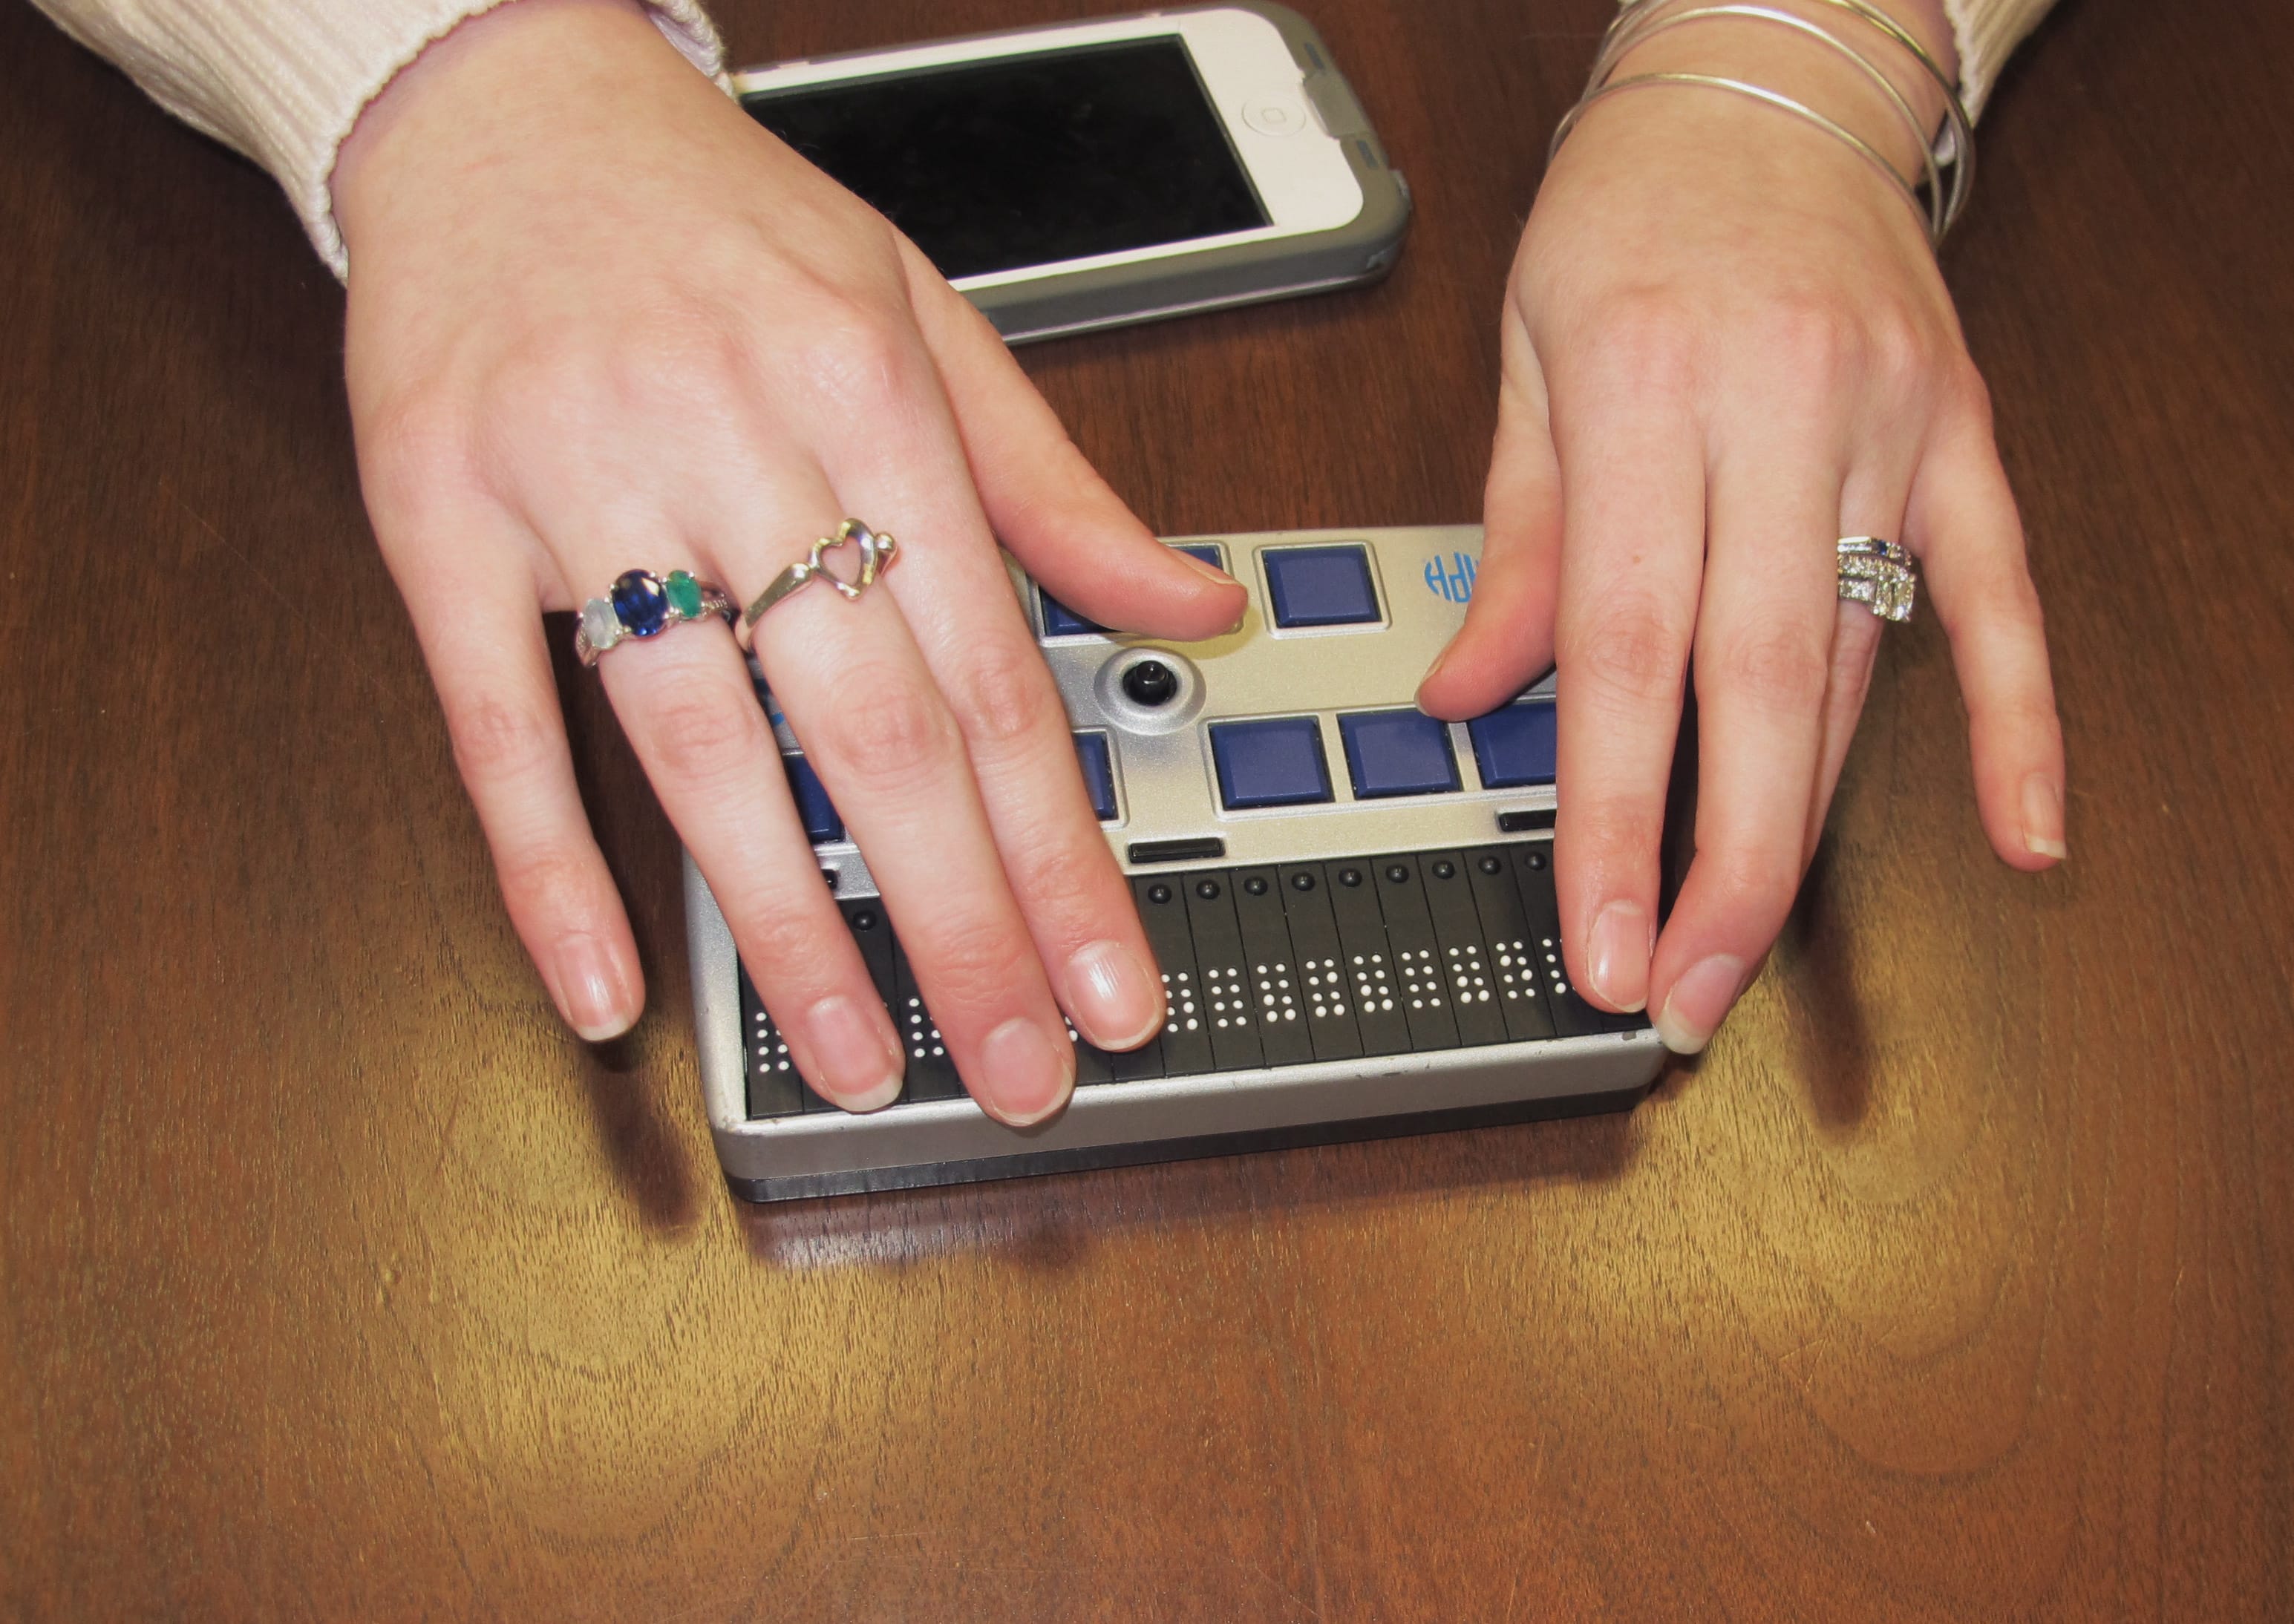 Megan Dausch, an instructor at the Helen Keller National Center, demonstrates the use of a Braille reader that helps blind clients access the Internet, in Sands Point, N.Y.